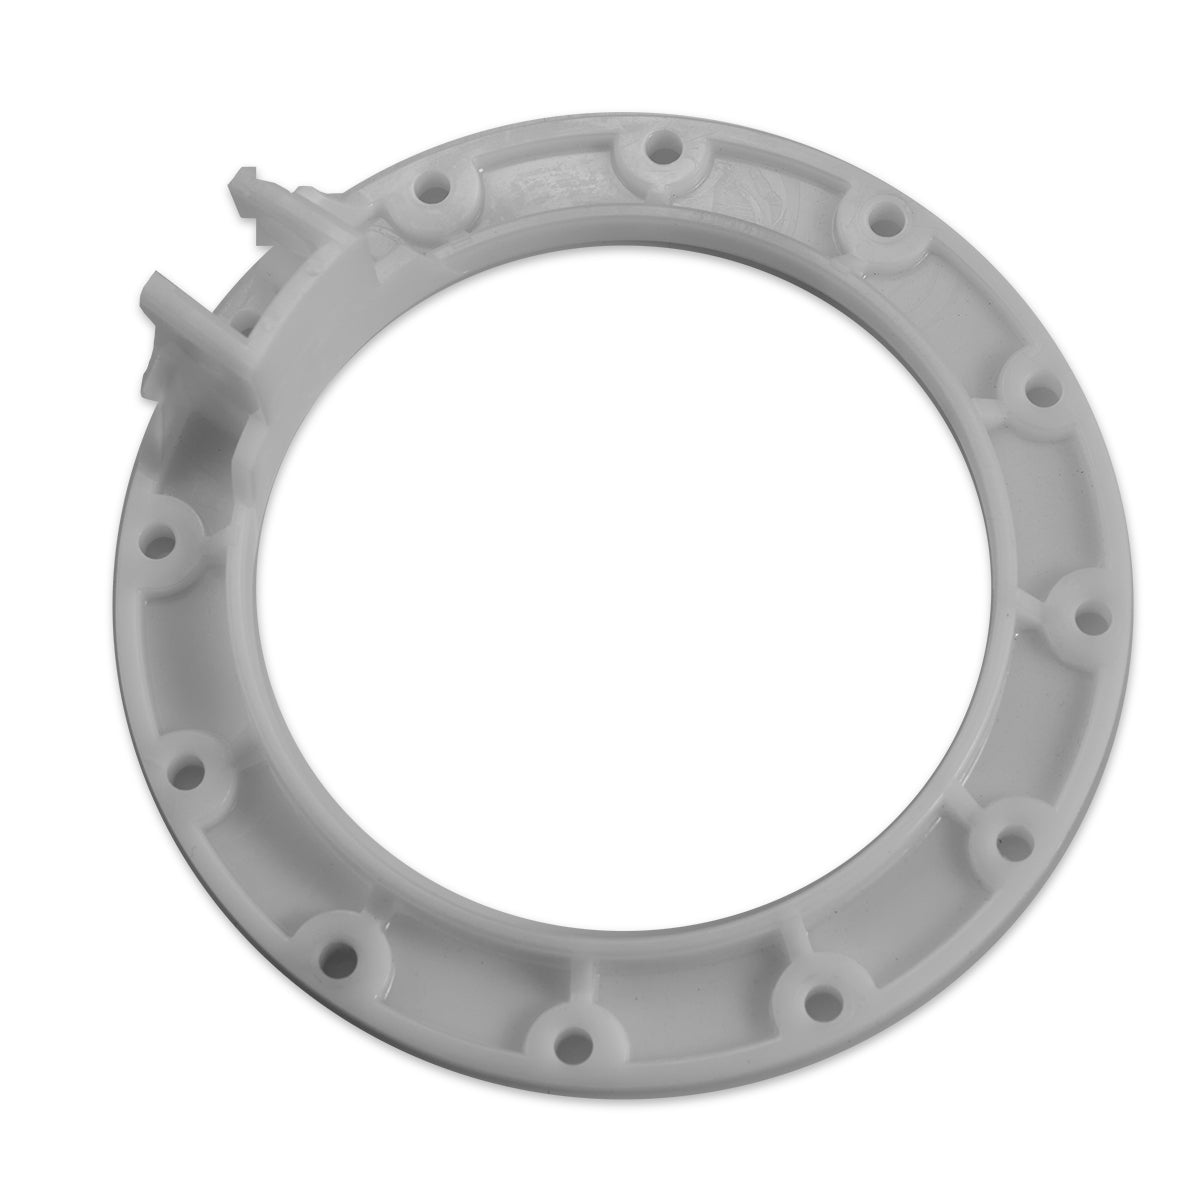 Plastic Ring for 7" Hand Pump on Filter Press